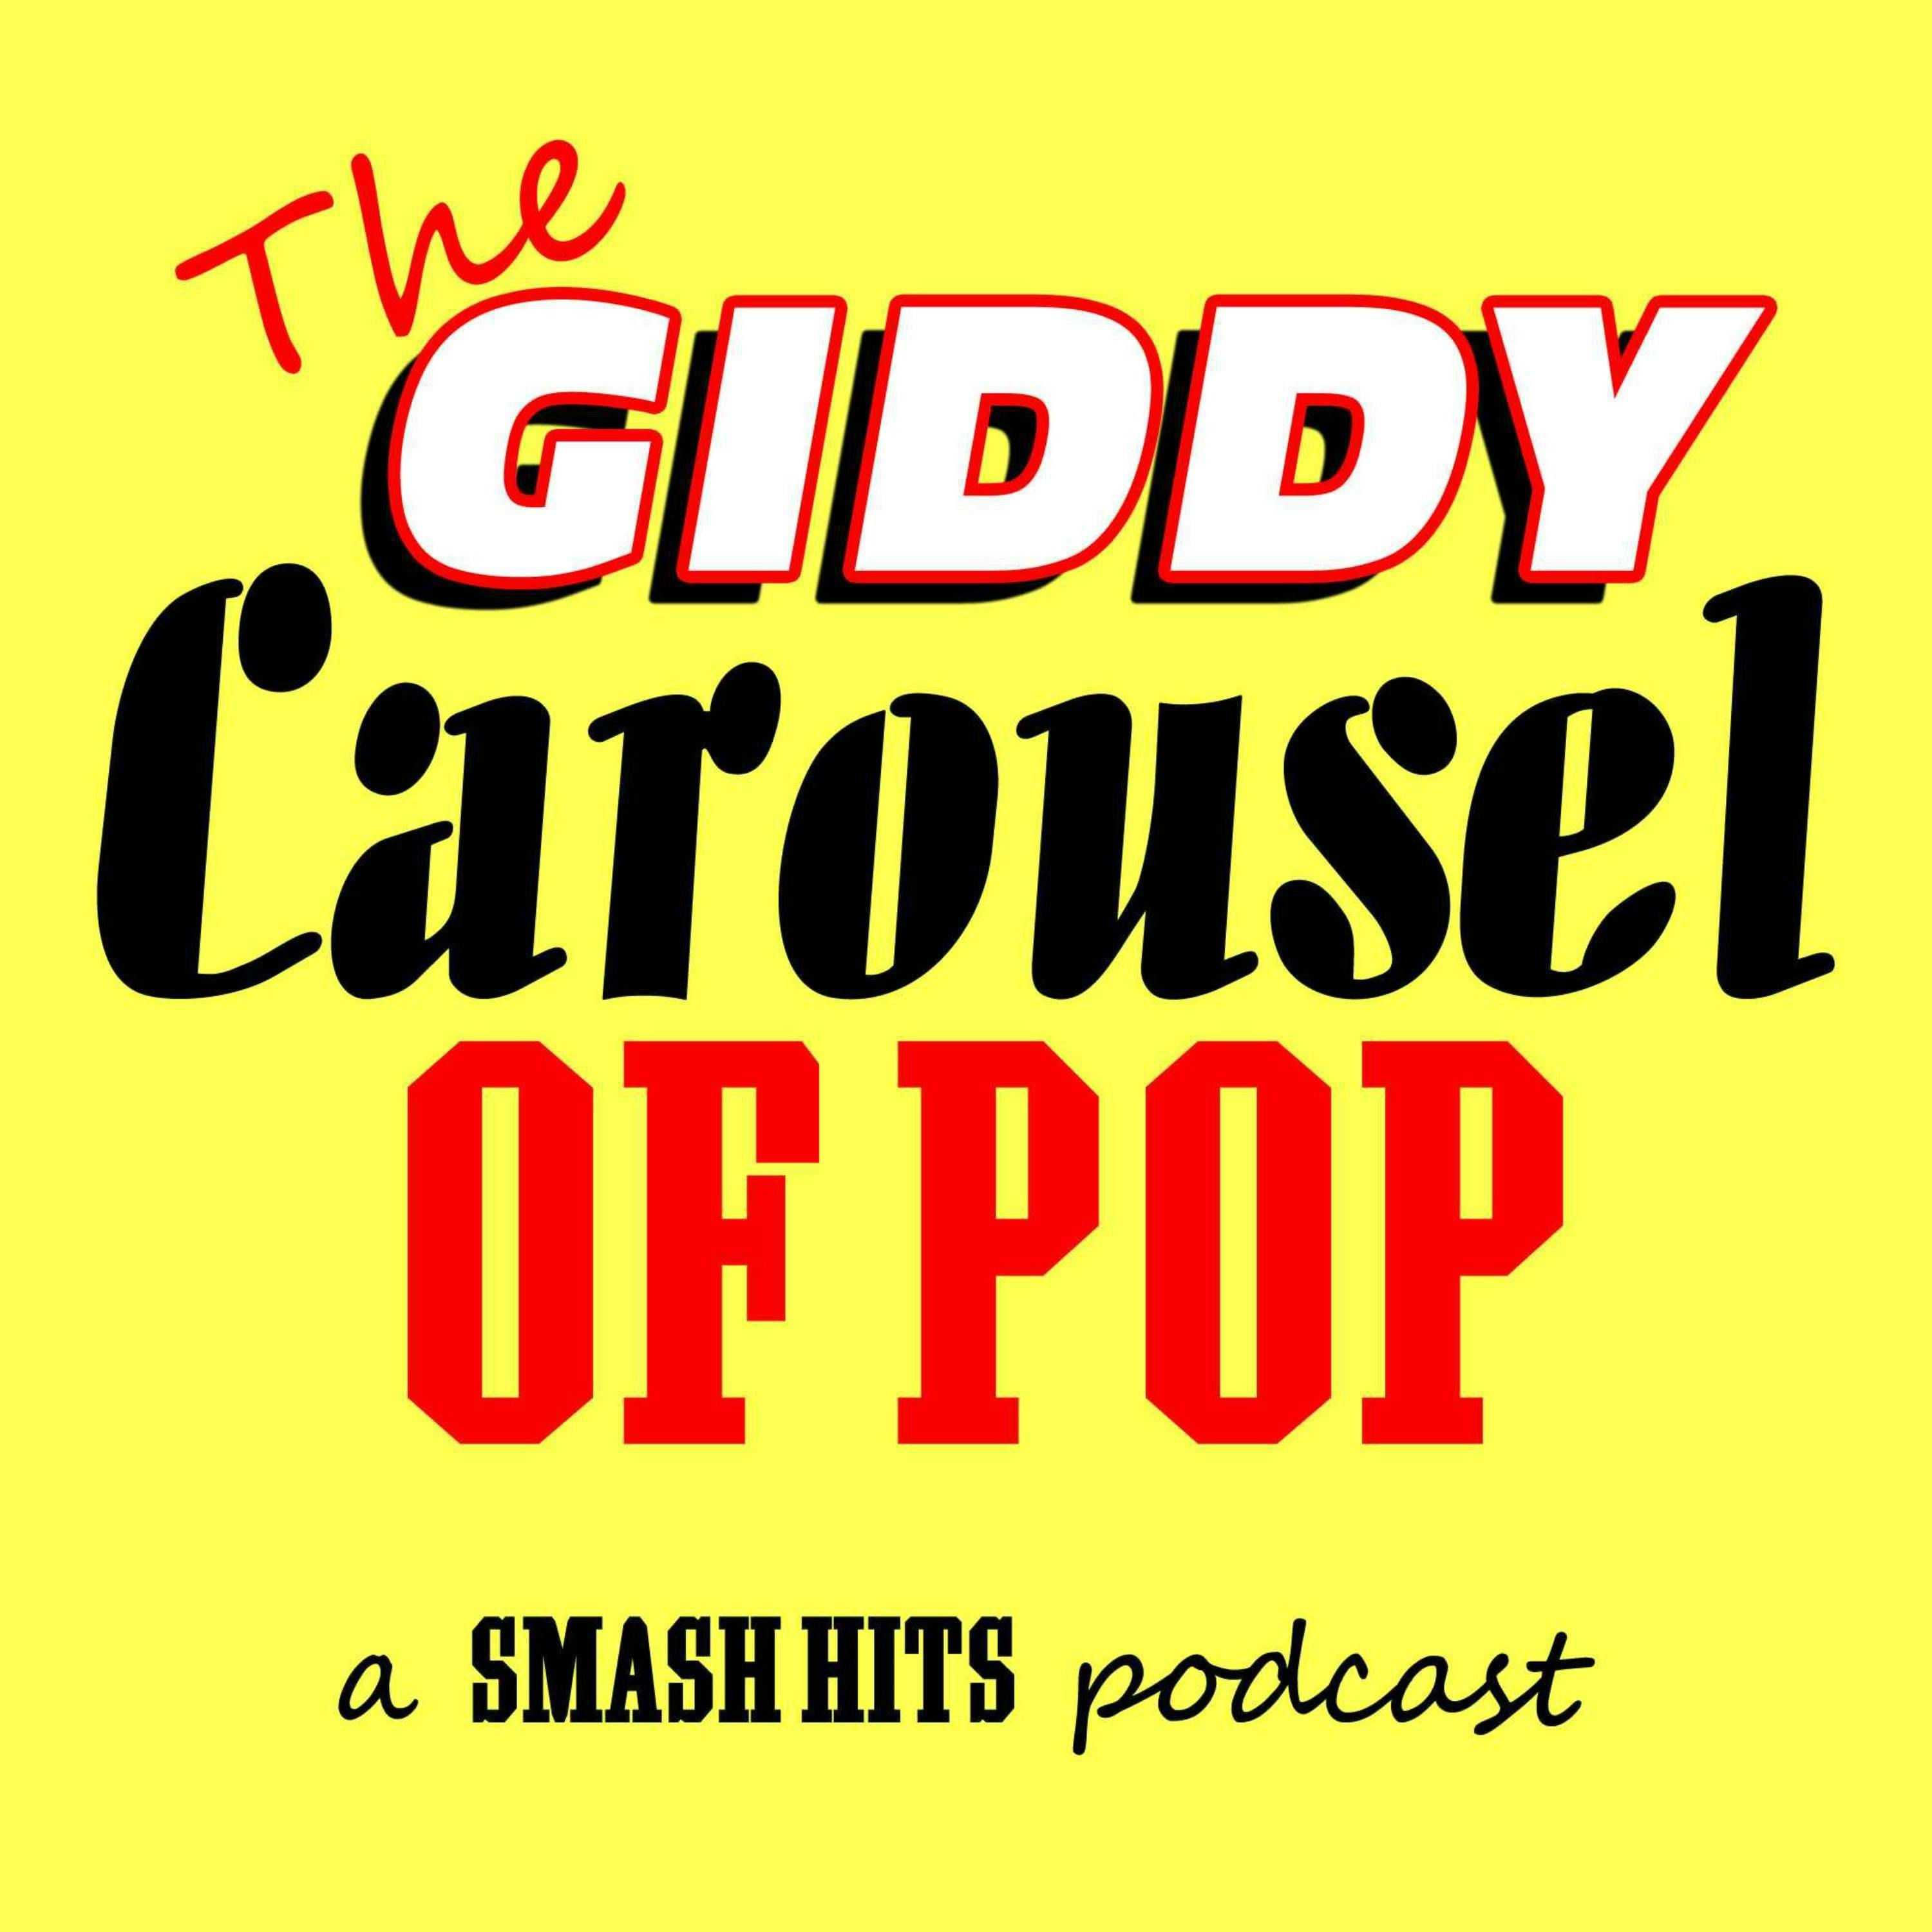 The Giddy Carousel of Pop